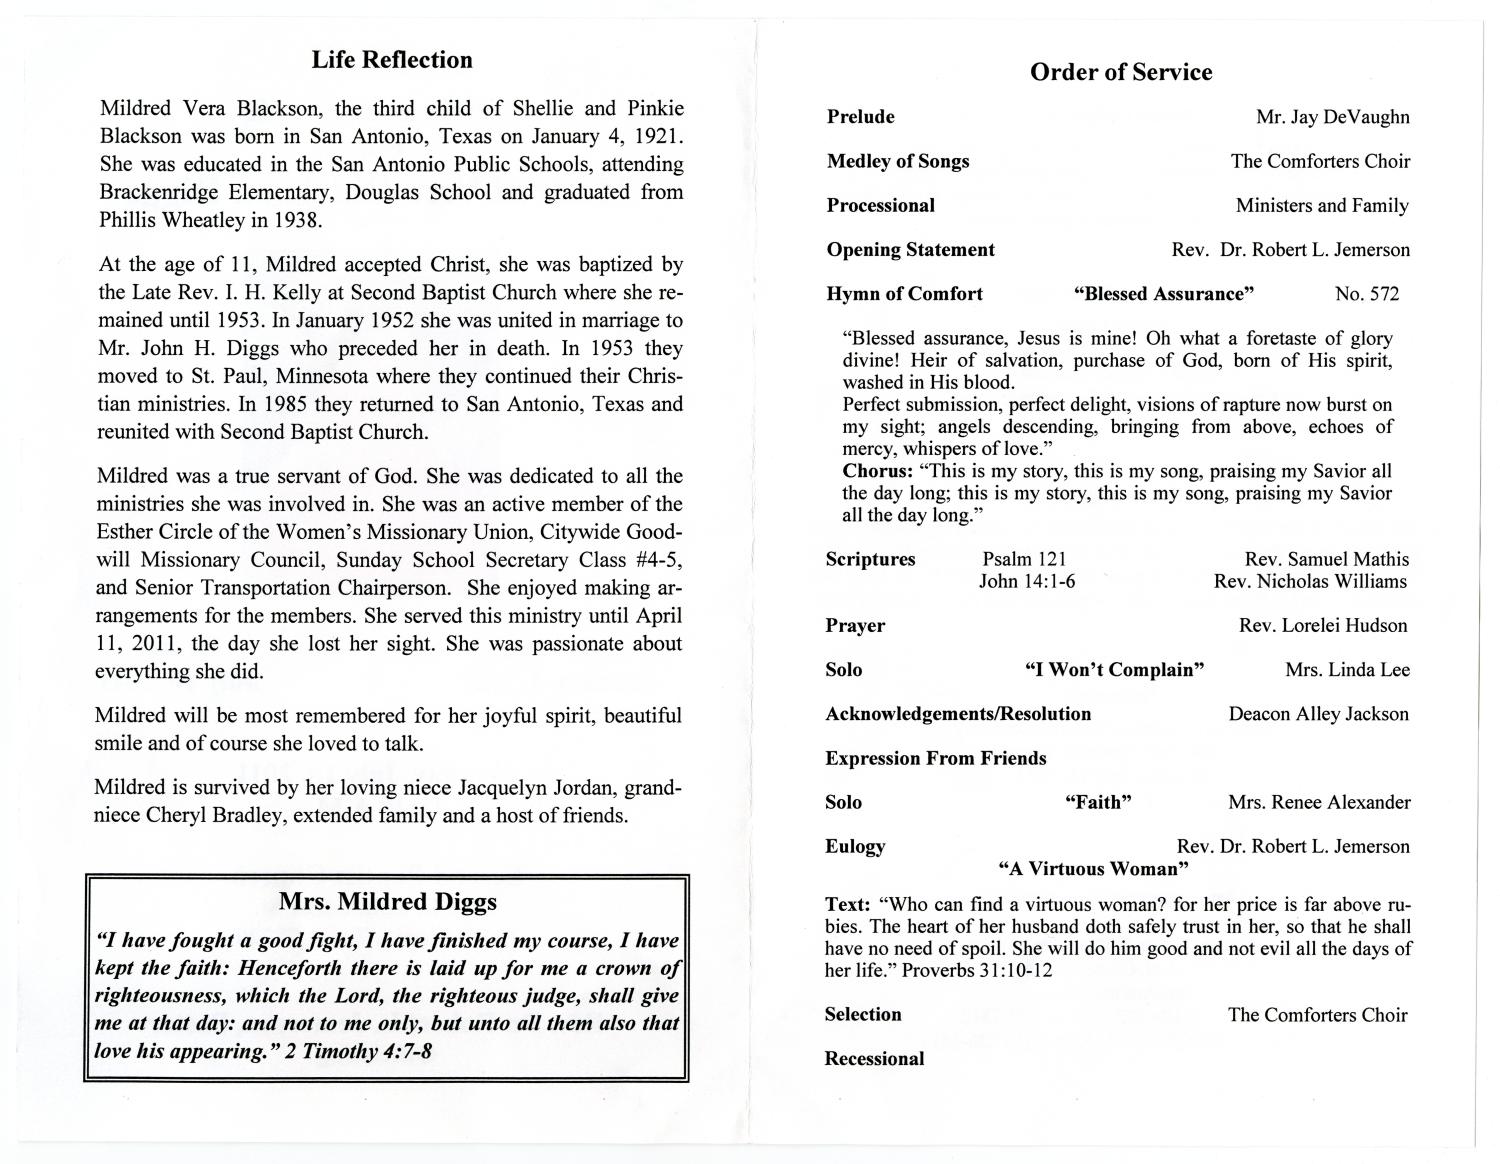 [Funeral Program for Mildred Vera Blackson Diggs, July 18, 2011]
                                                
                                                    [Sequence #]: 2 of 3
                                                